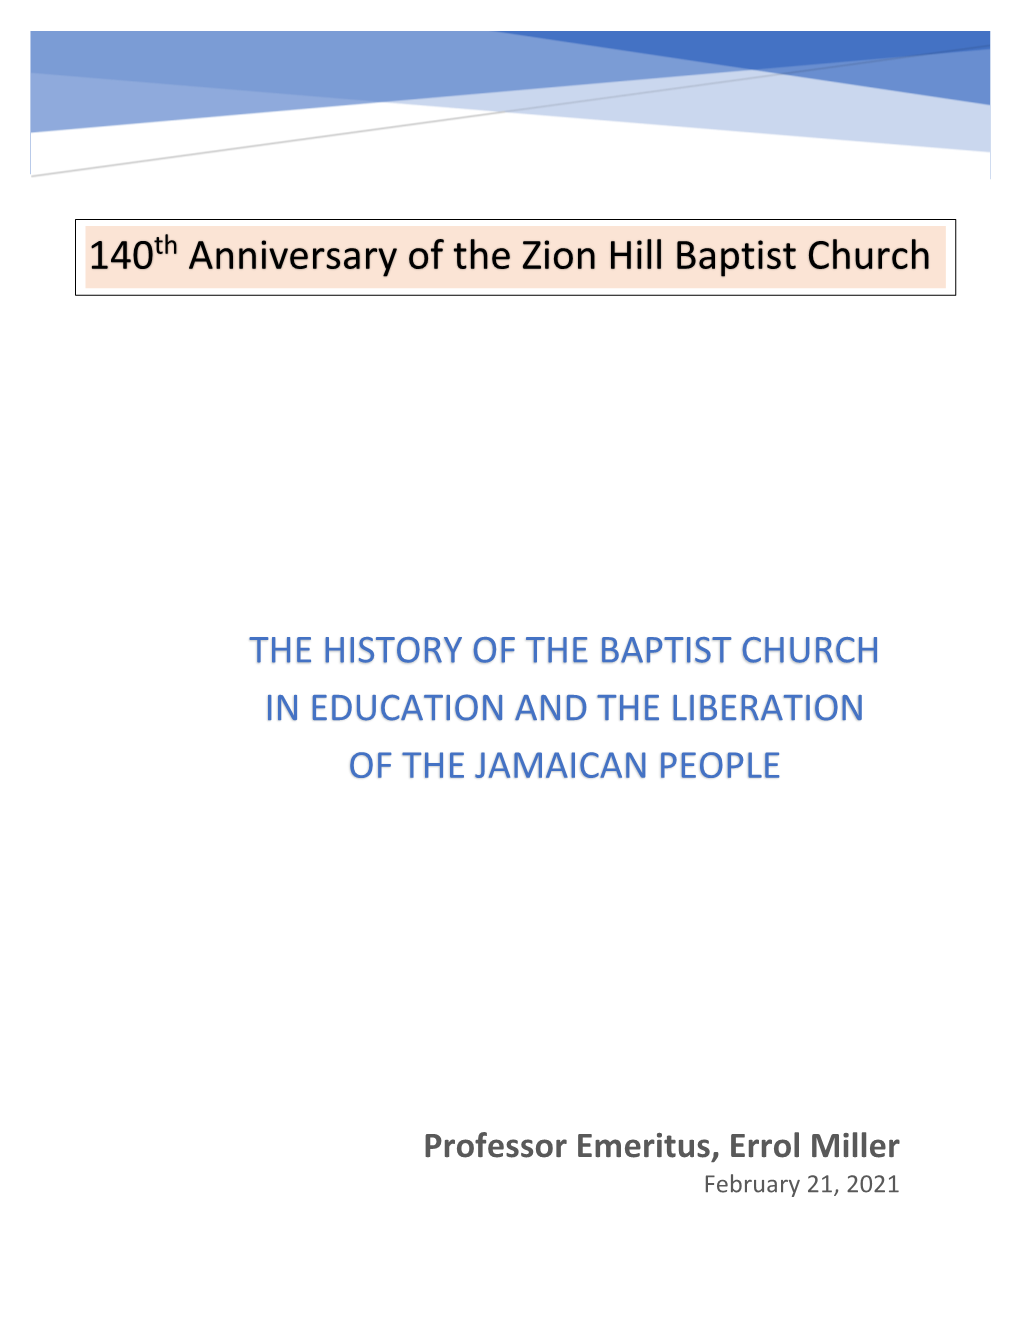 The History of the Baptist Church in Education and the Liberation of the Jamaican People